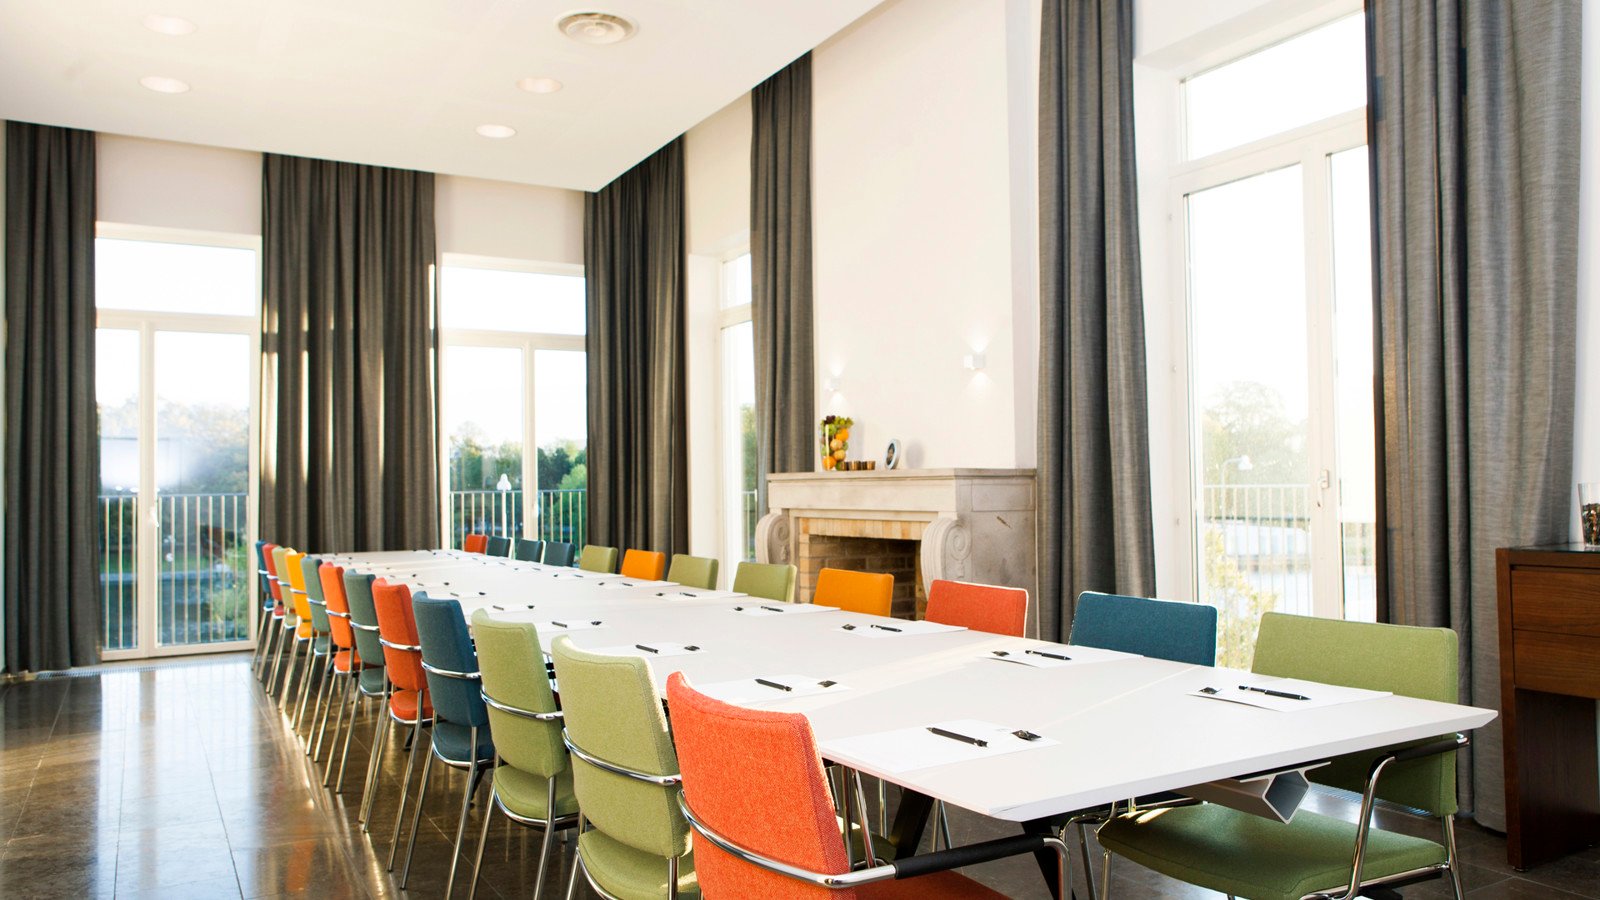 Big table with colourful chairs and grey curtains